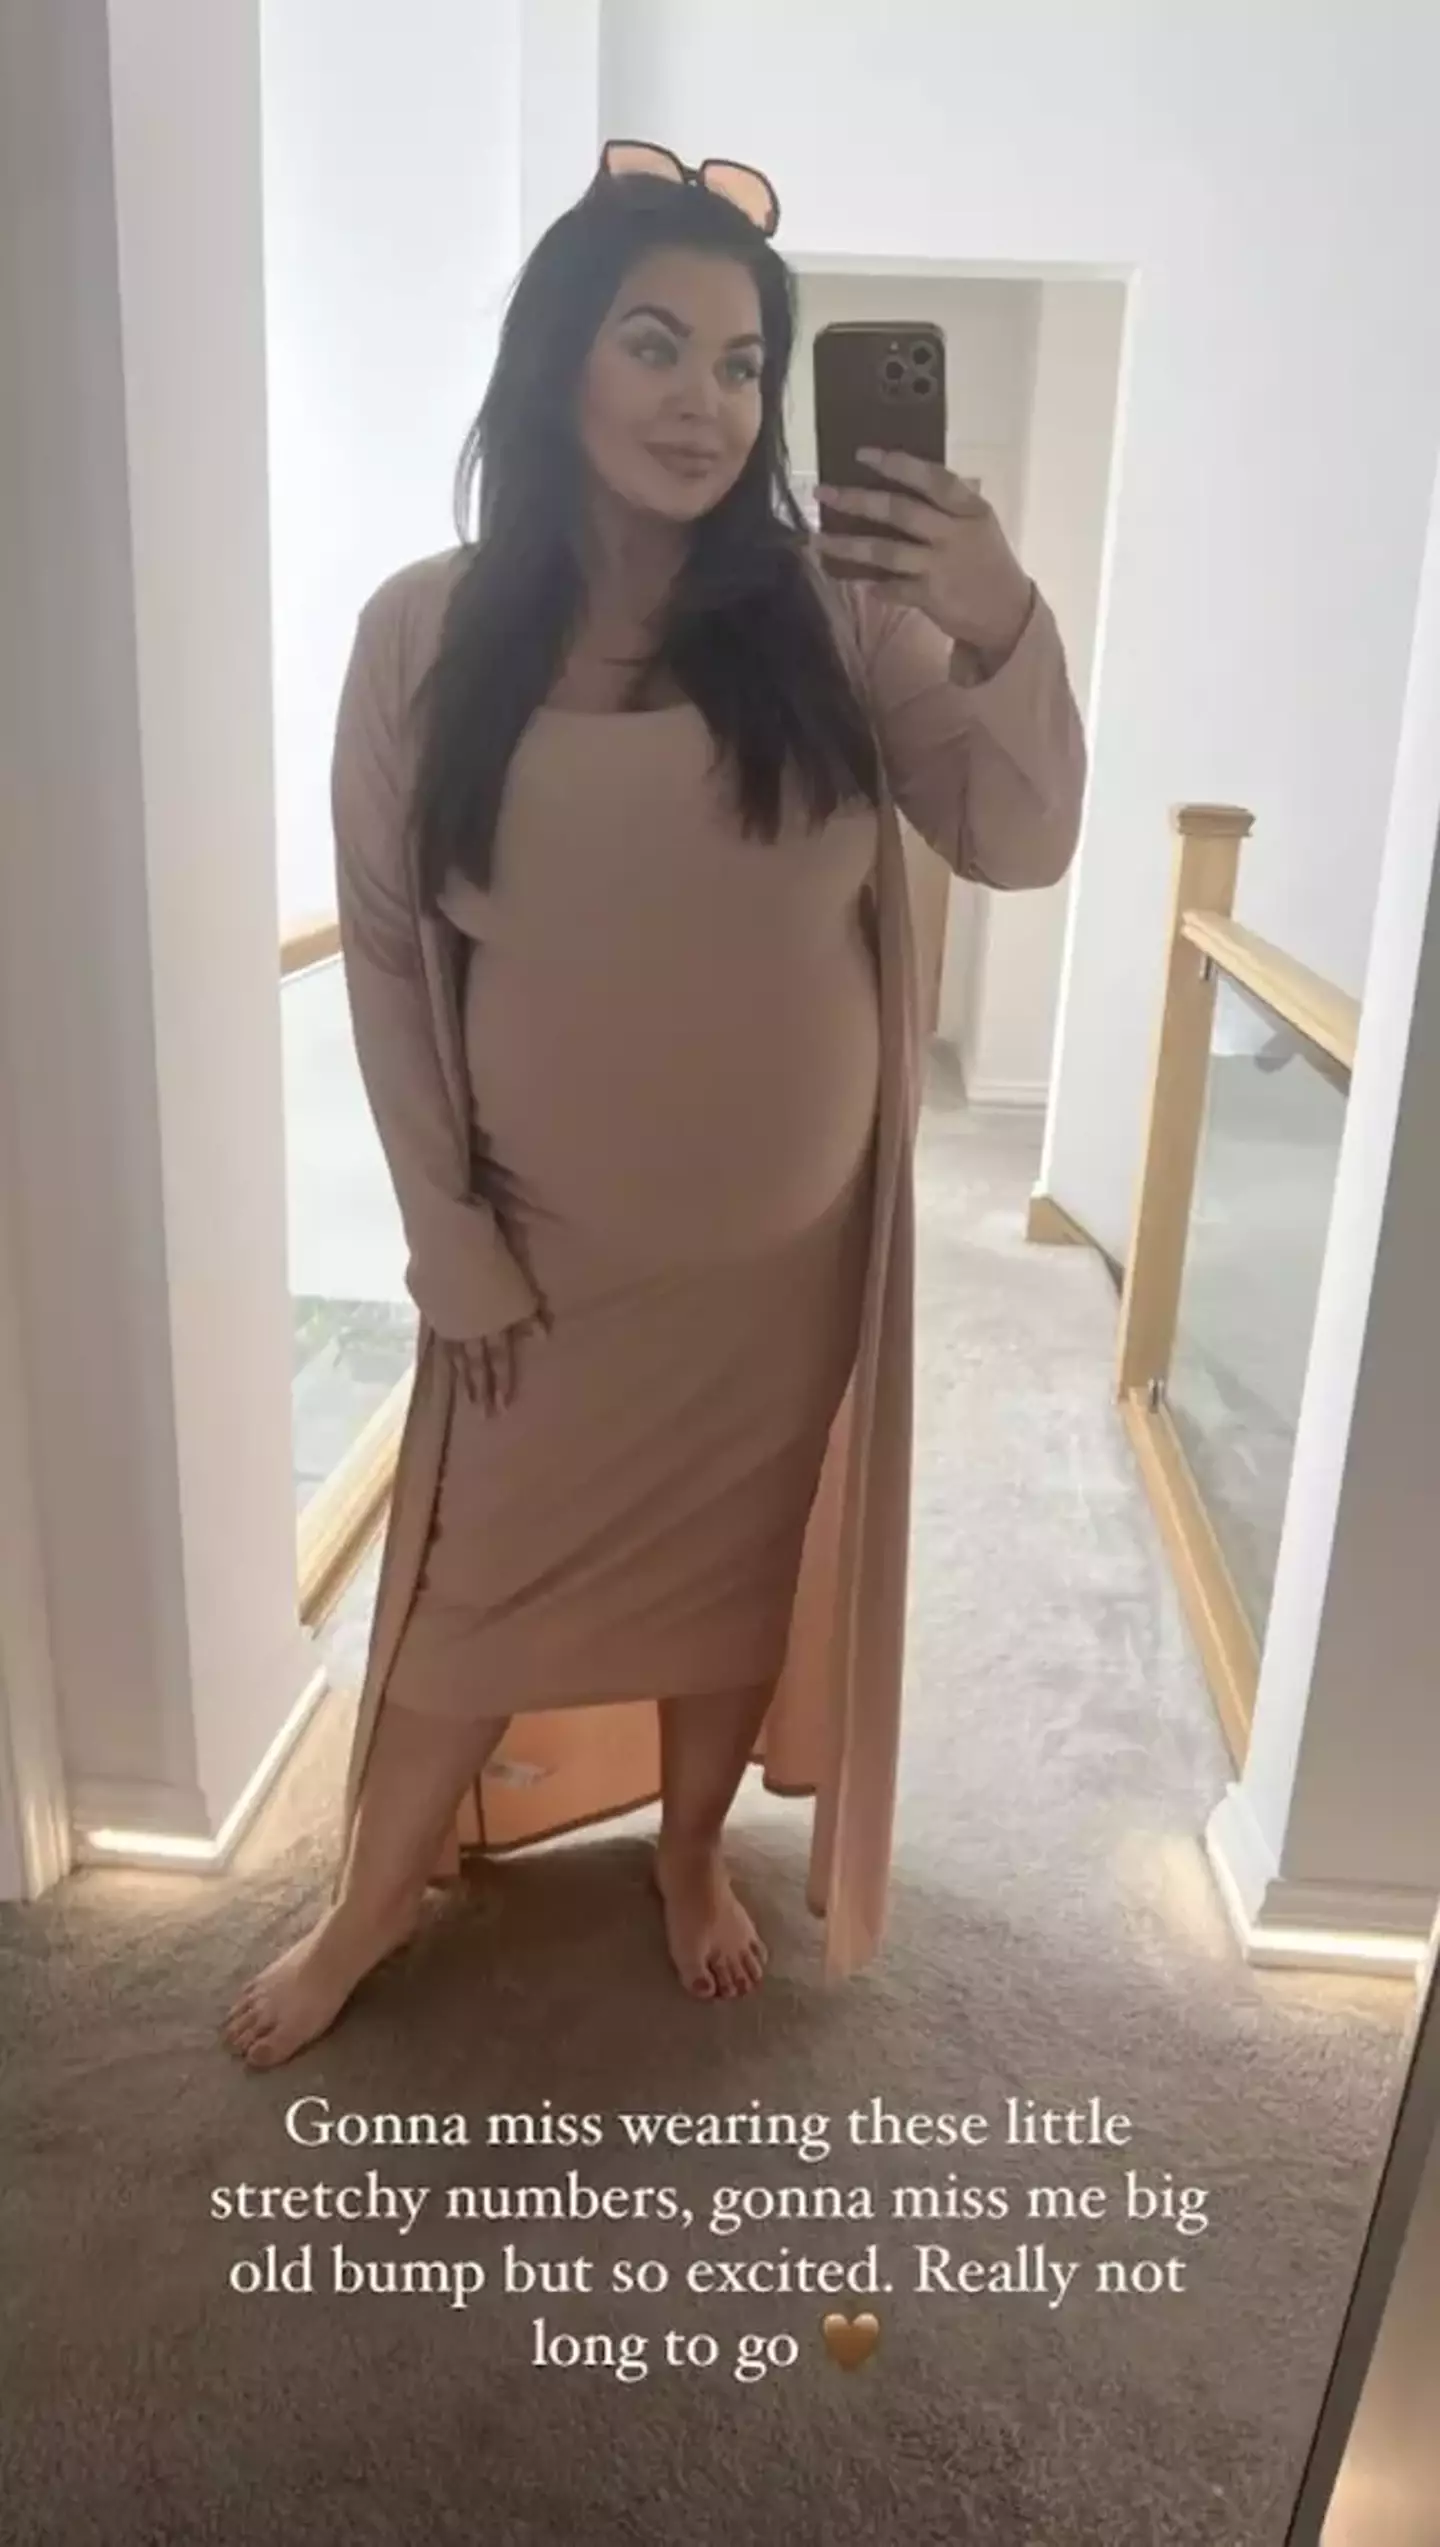 It's no more wearing the 'little stretchy numbers' for Scarlett Moffatt, unless of course she decides to have another baby.